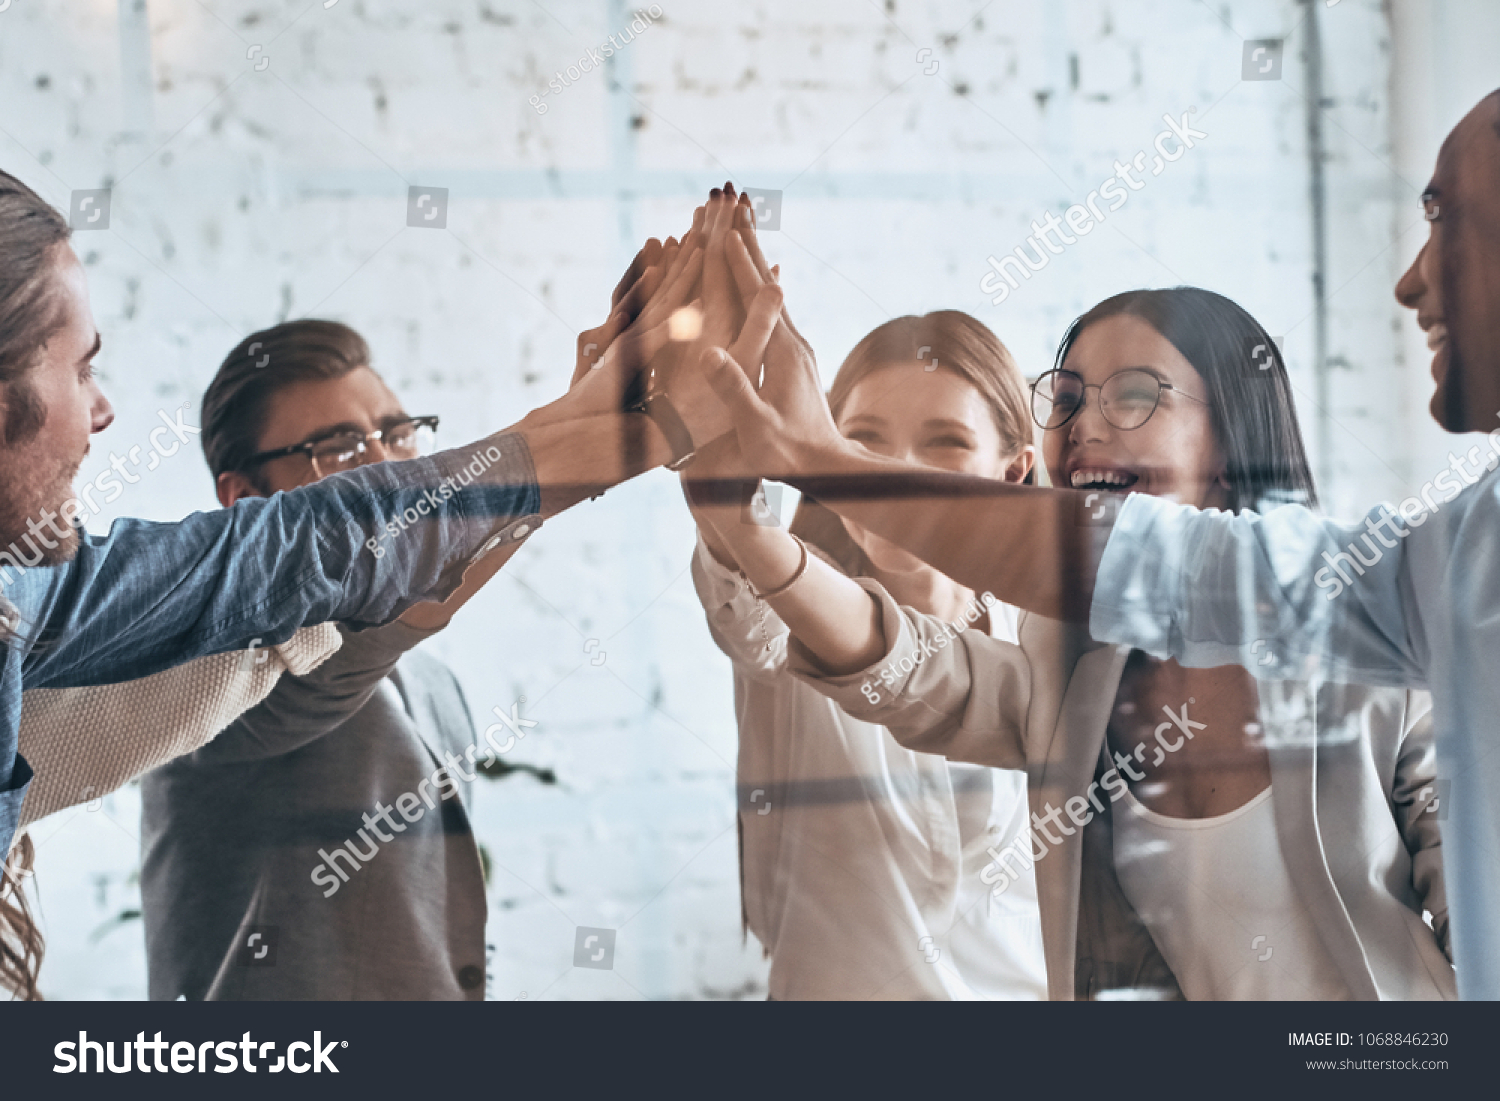 High-five! Group of business colleagues giving each other high-five while working behind the glass wall in the board room #1068846230